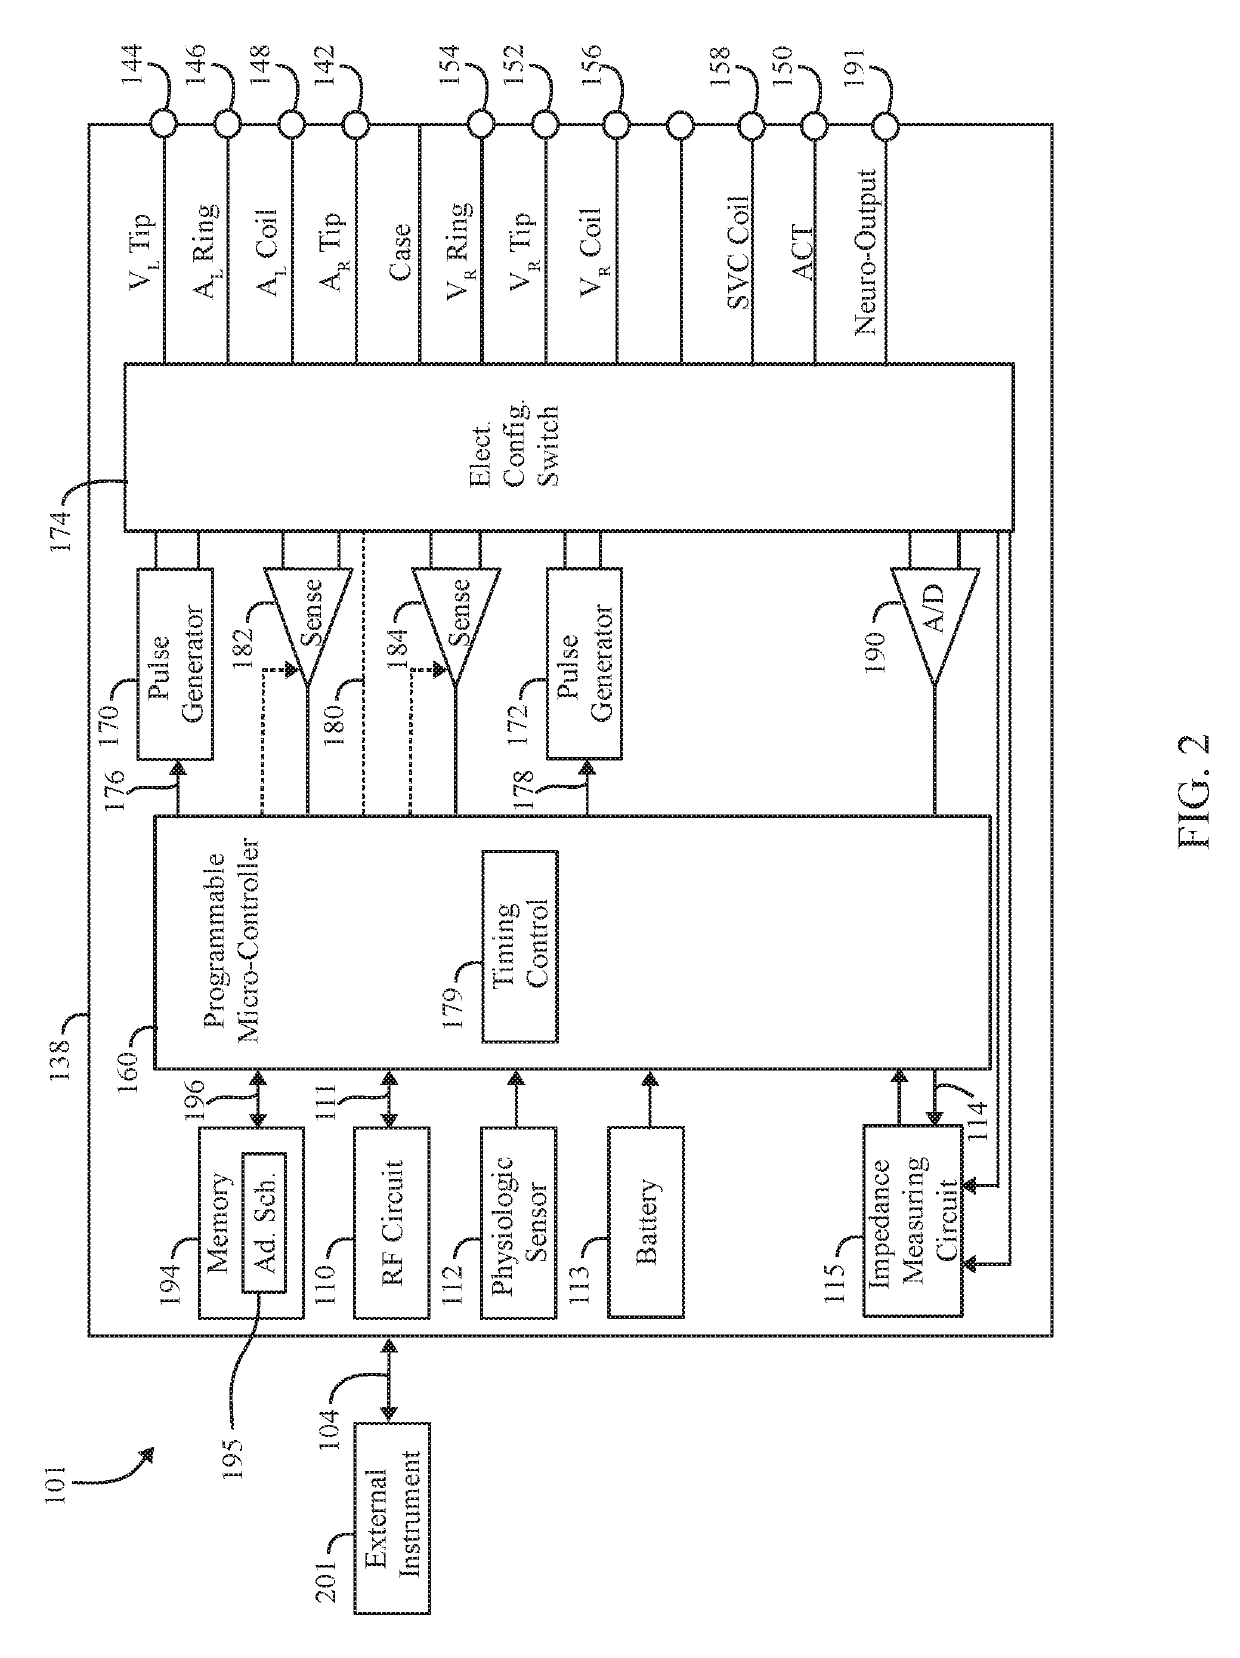 Managing dynamic connection intervals for implantable and external devices